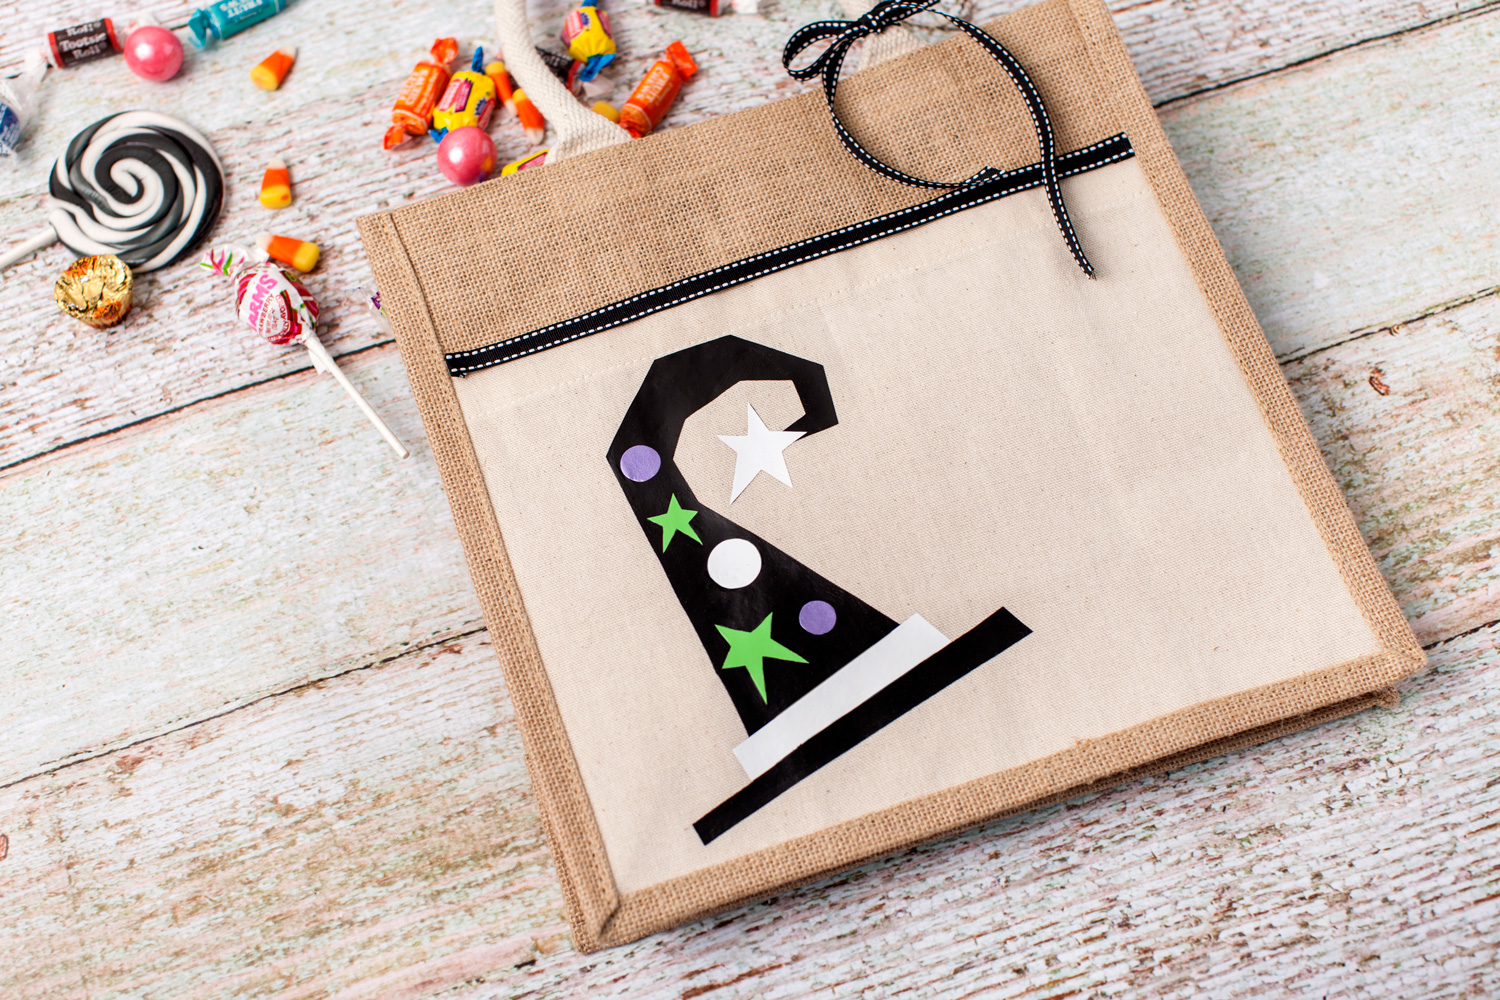 witches hat trick-or-treat bags